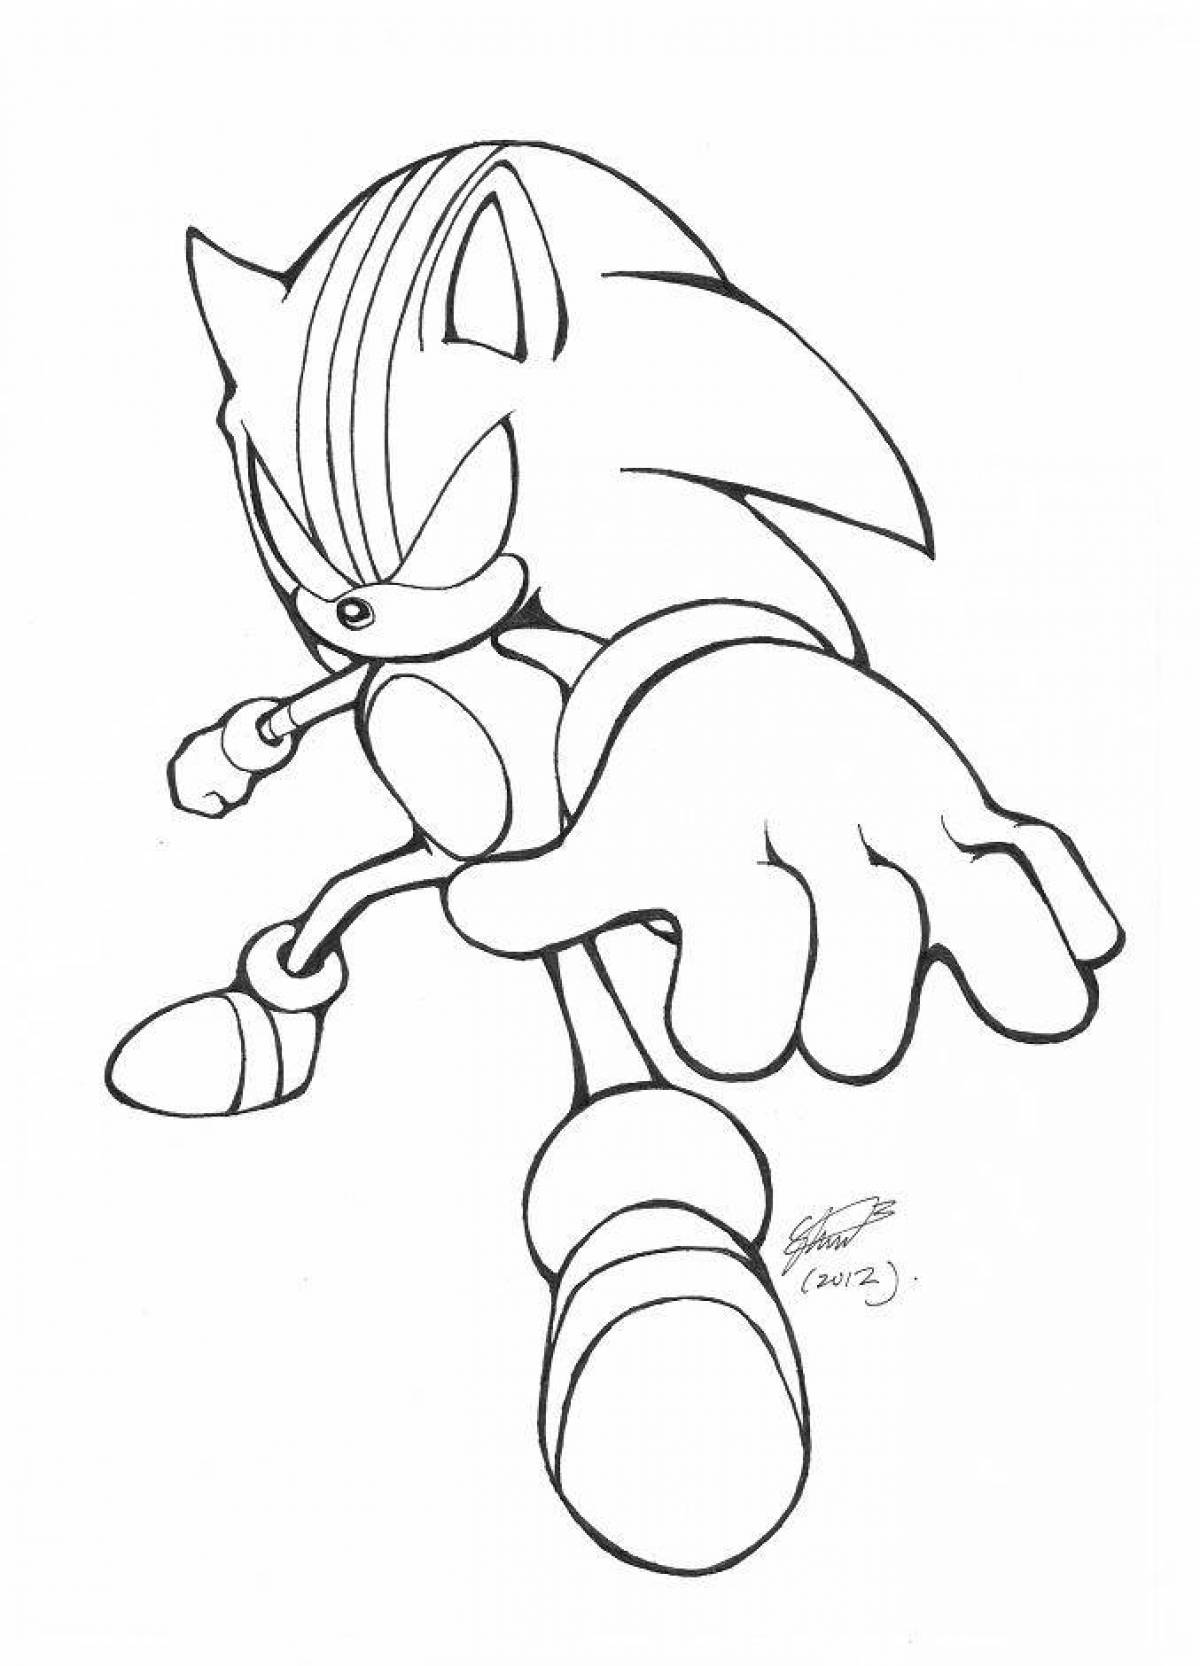 Great dark sonic coloring page